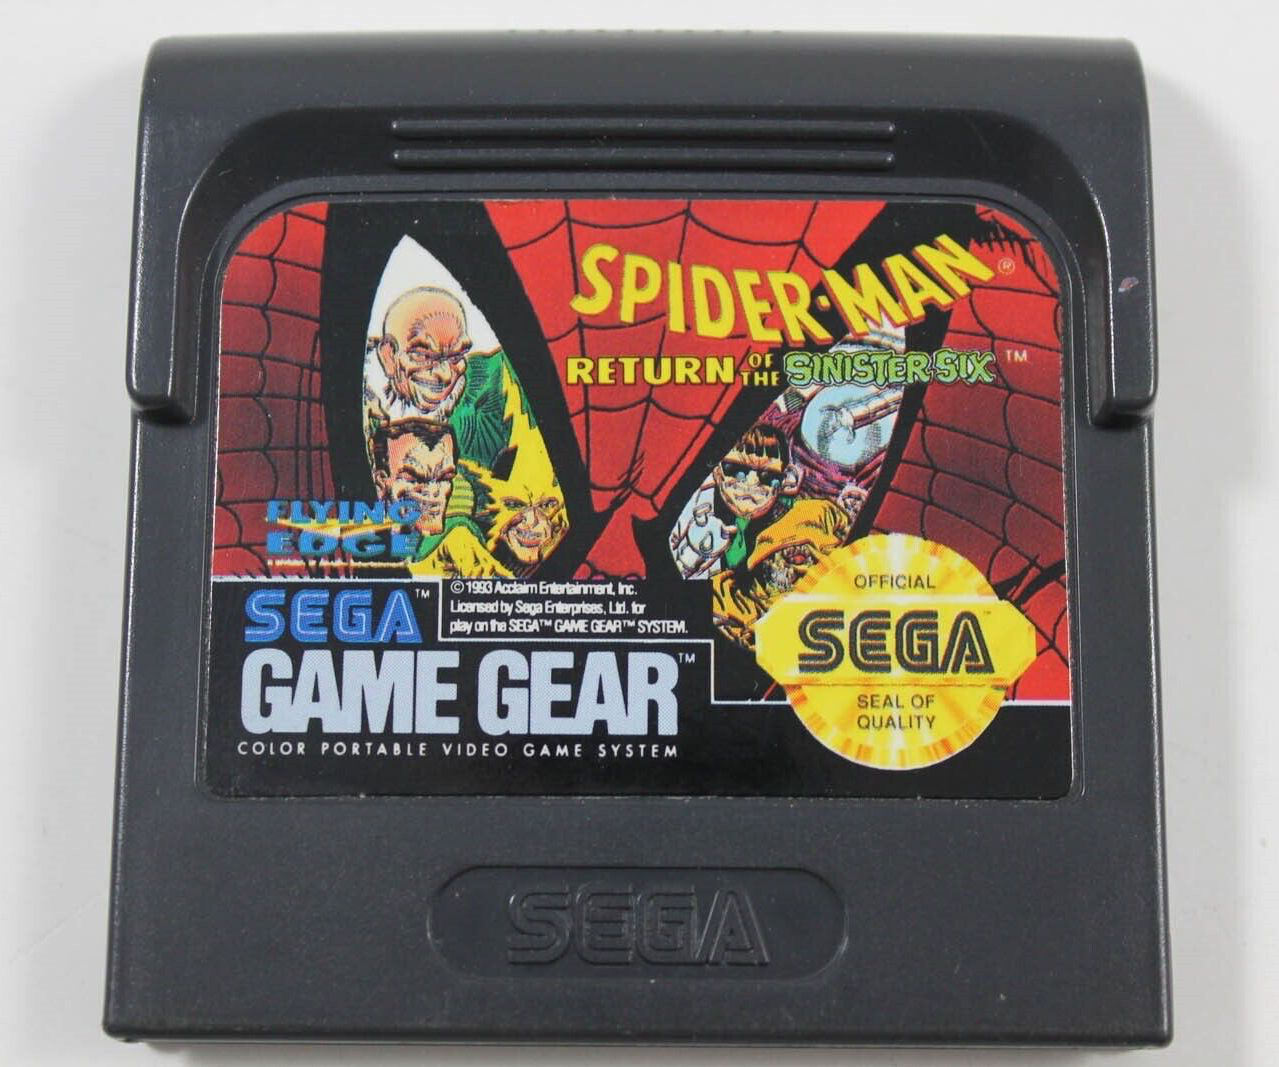 Spiderman Return of the Sinister Six - Game Gear